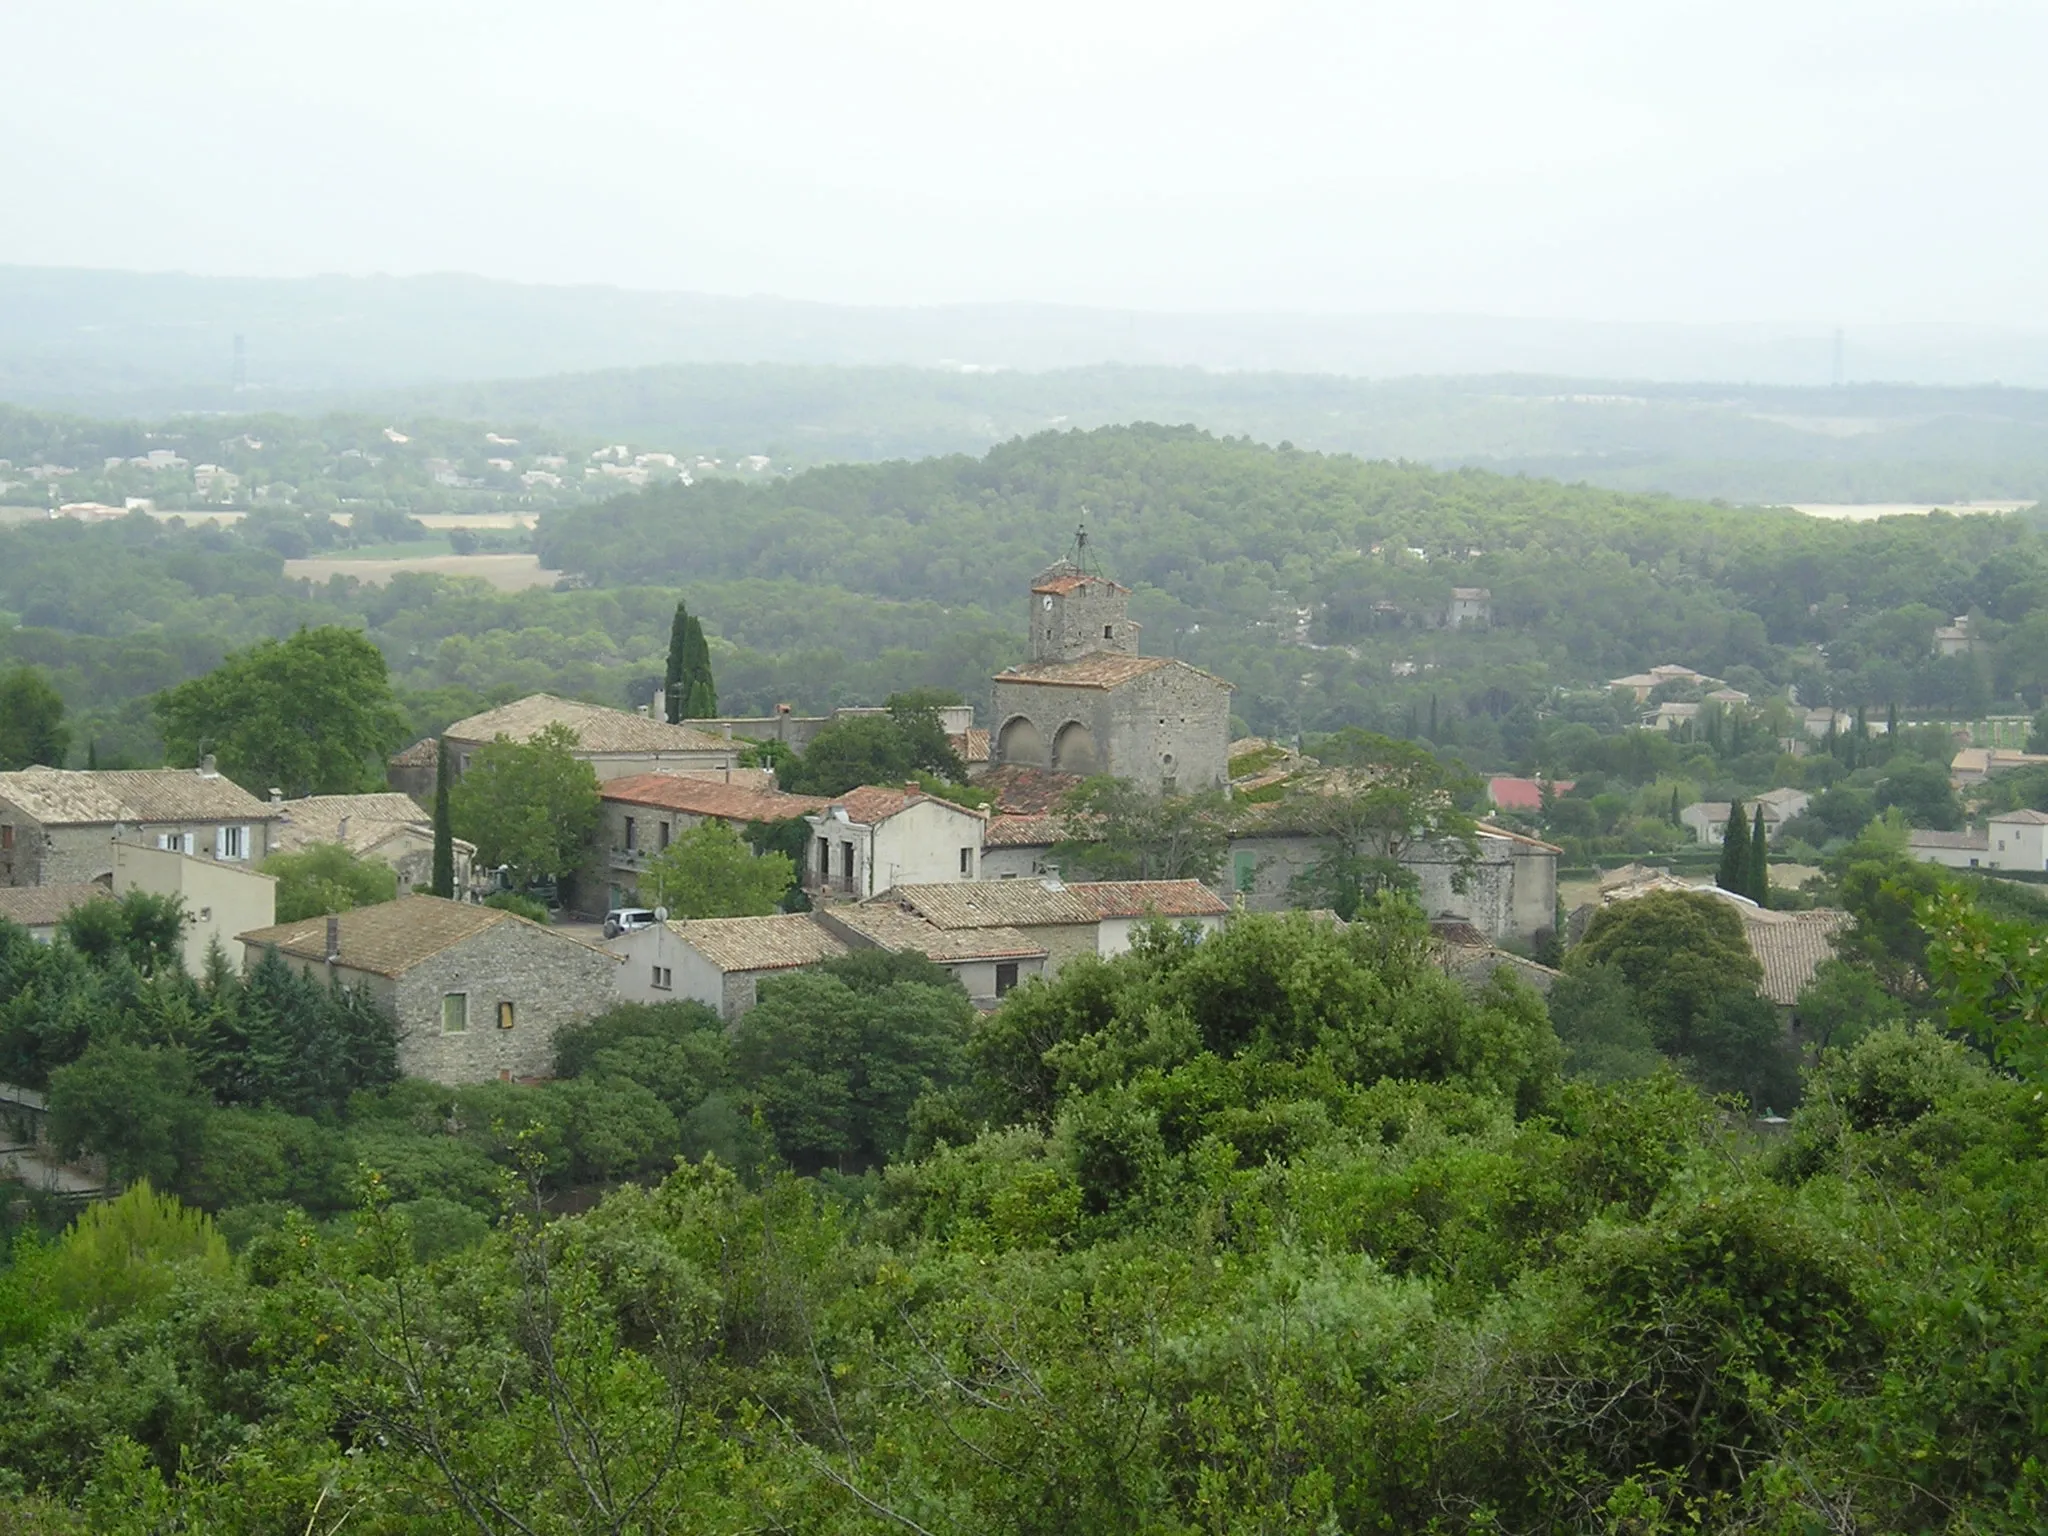 Photo showing: In Hérault, France, the old village of Saint-Jean-de-Cuculles and its church viewed from North-North-West (300 meters). In the background, aligned with the church, the boised hill of "le Bosquet" (125 meters altitude at 1.5 kilometer from photographer localted at 150-155 meters) ; and on the left, the village of Le Triadou.